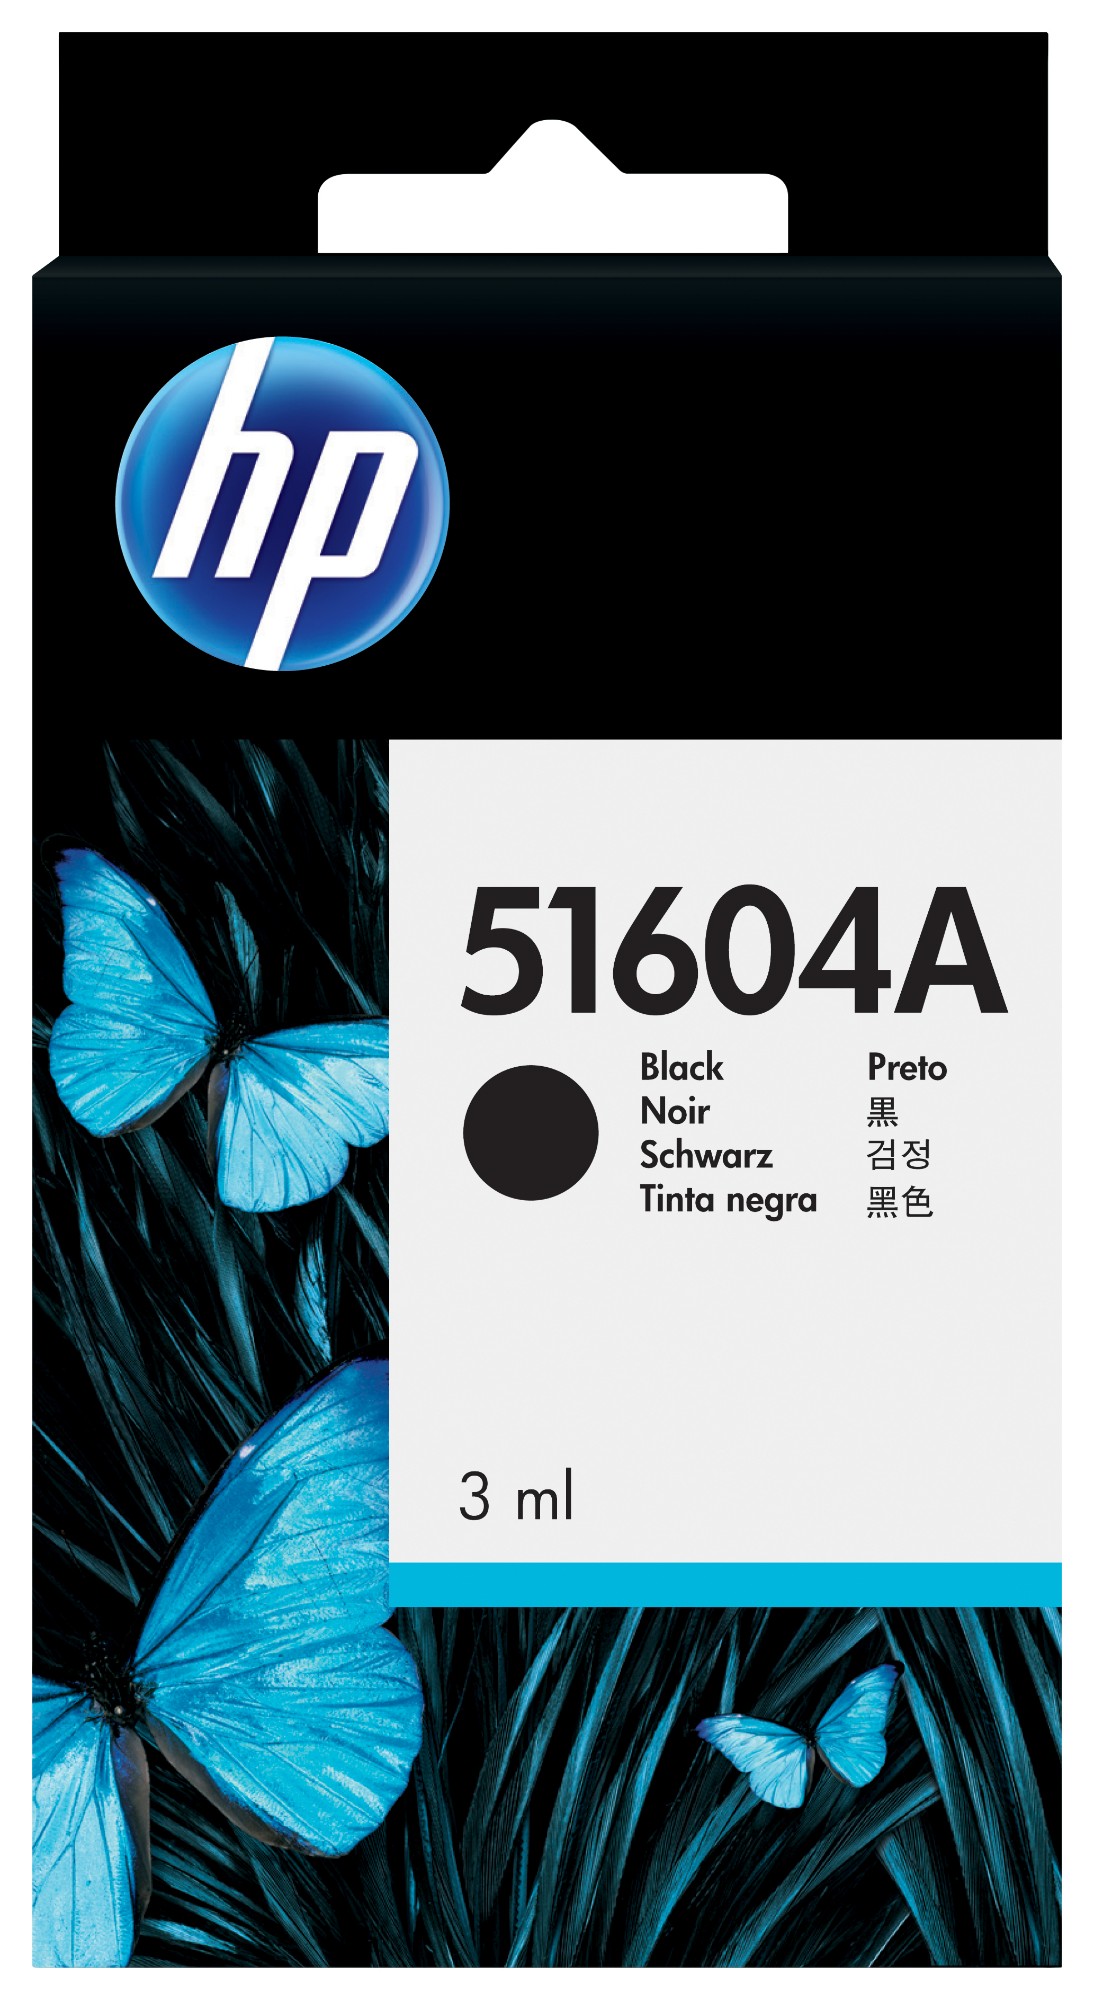 HP 51604A Printhead cartridge black for Normal paper, 500 pages 3ml for HP ThInkJet/Reiner Speed-i-Jet 798